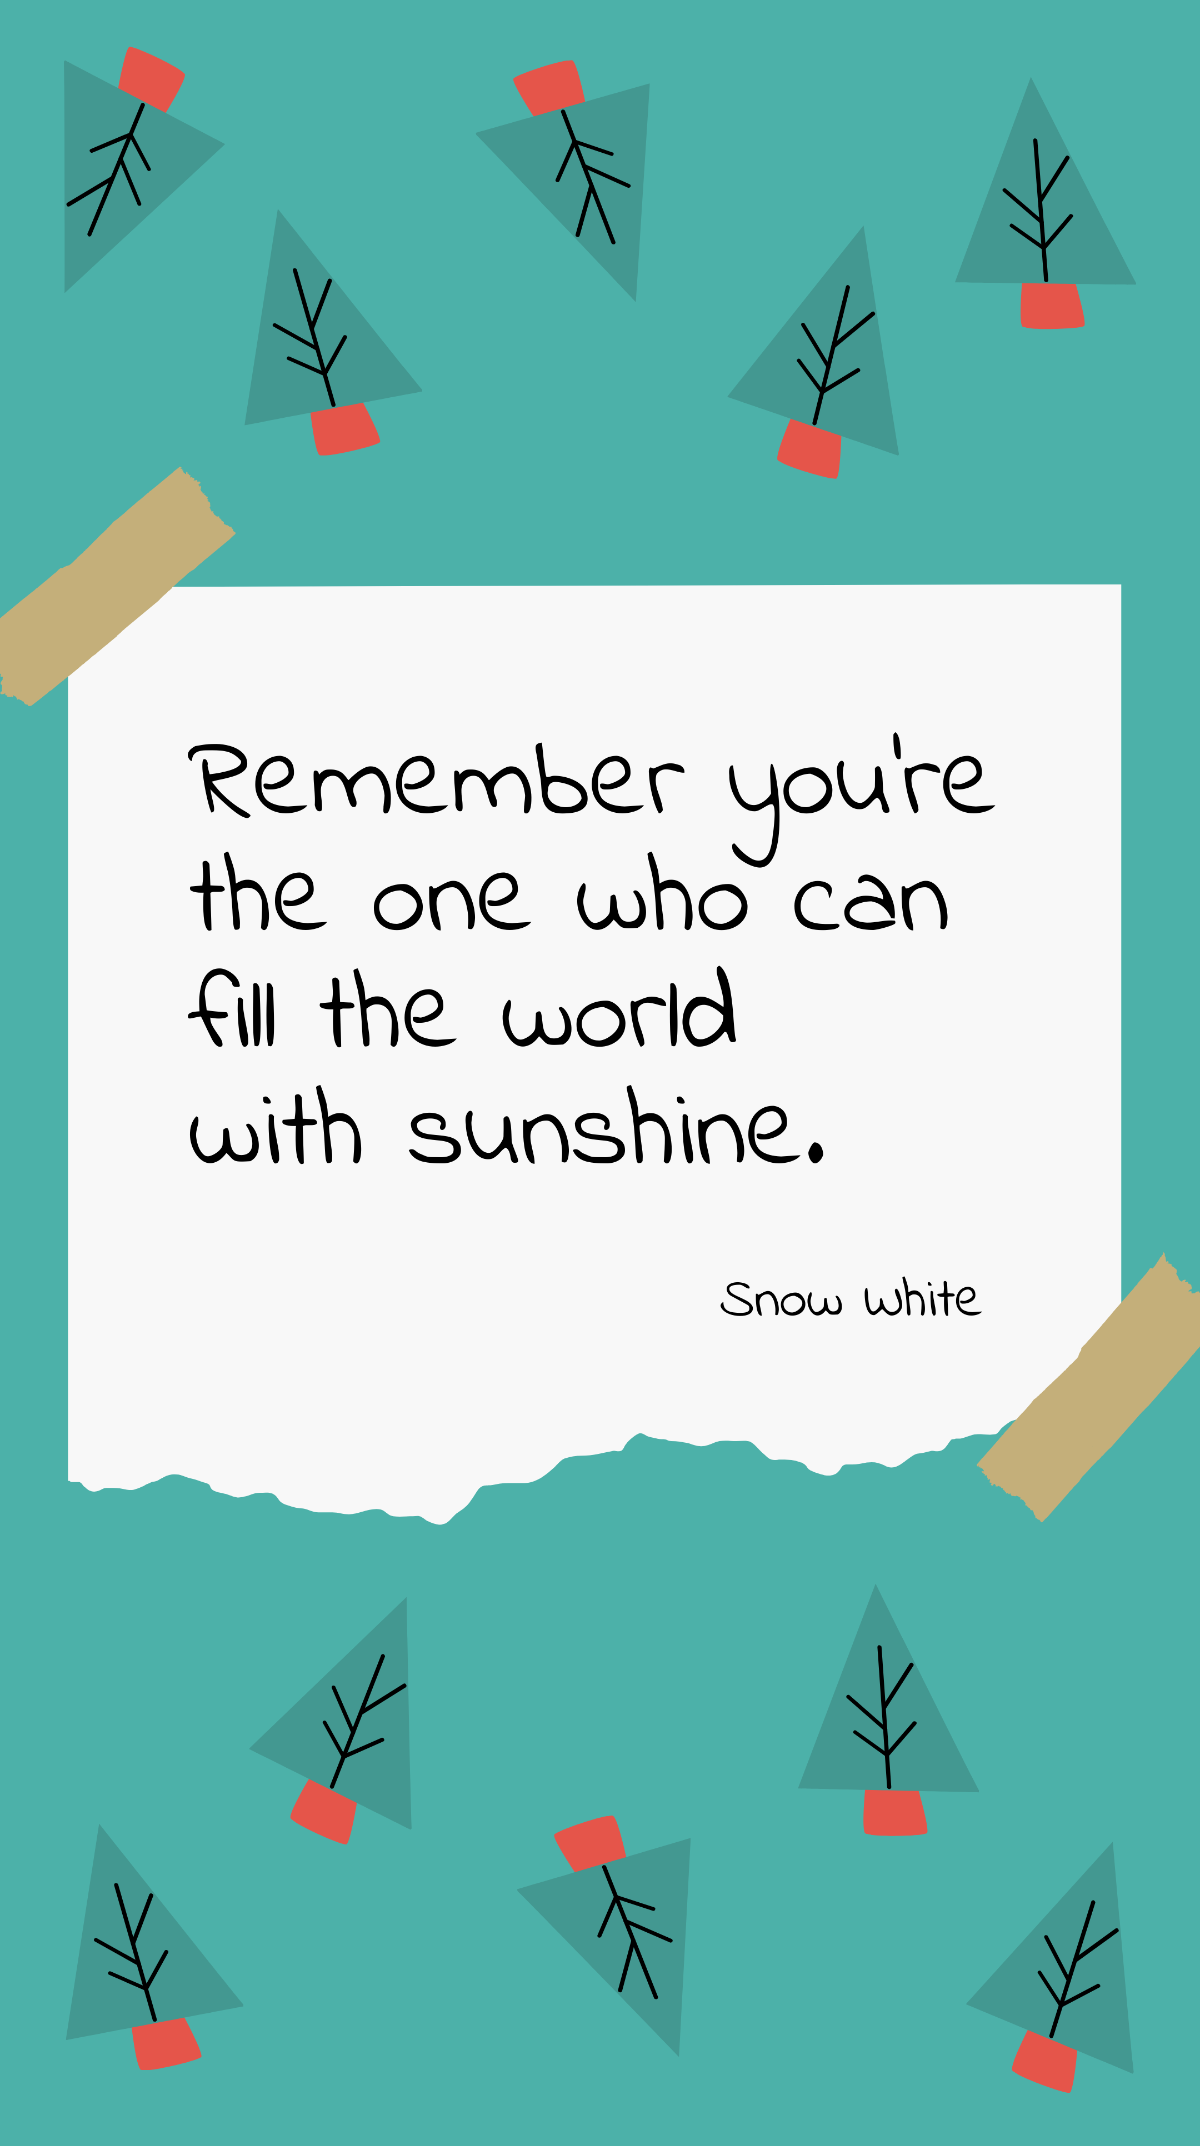 Snow White - Remember you’re the one who can fill the world with sunshine. Template